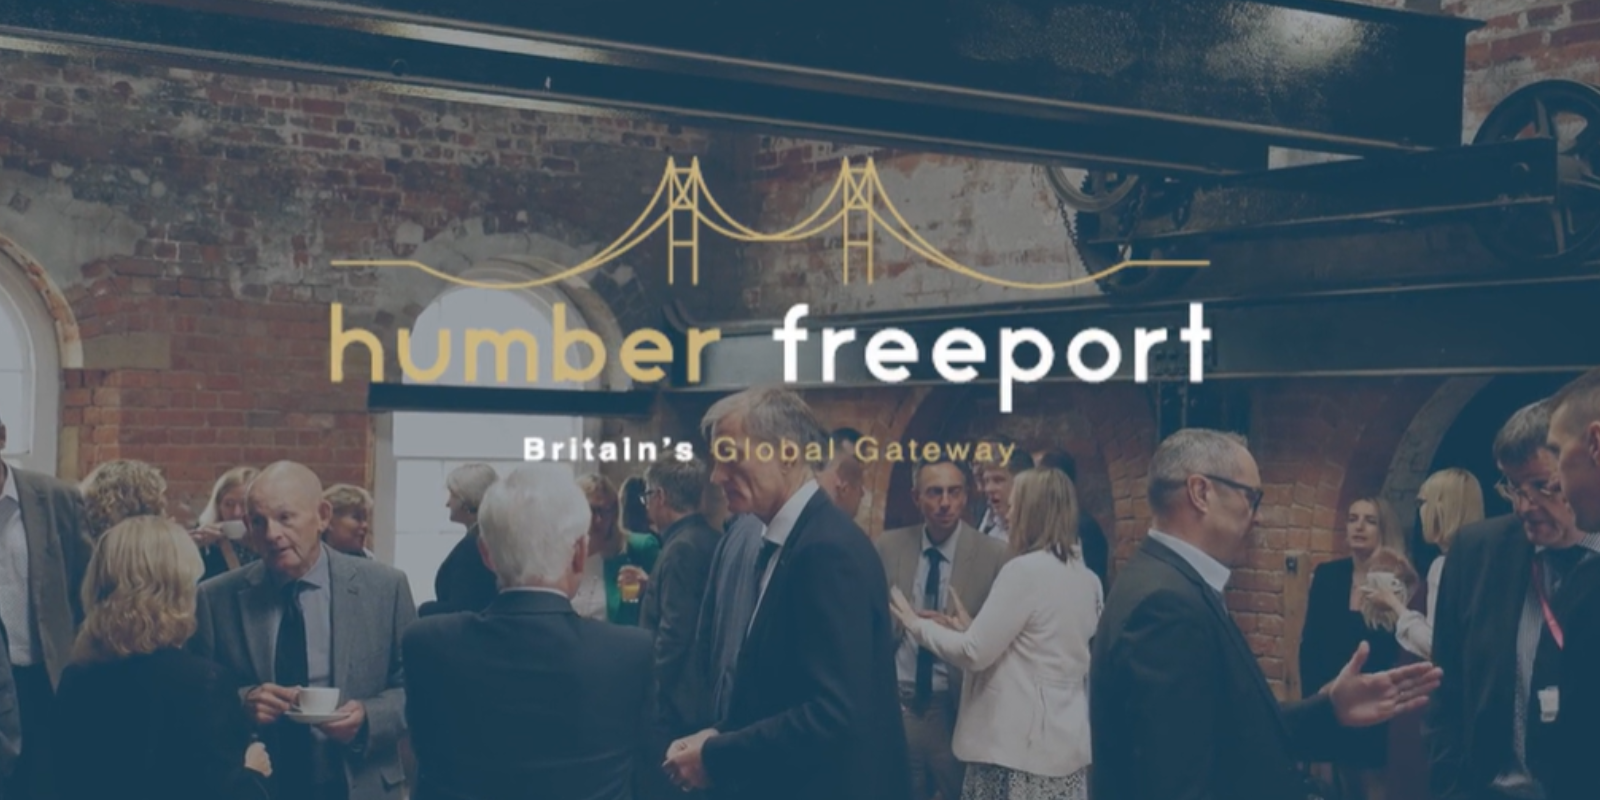 Humber Freeport Launch Event video